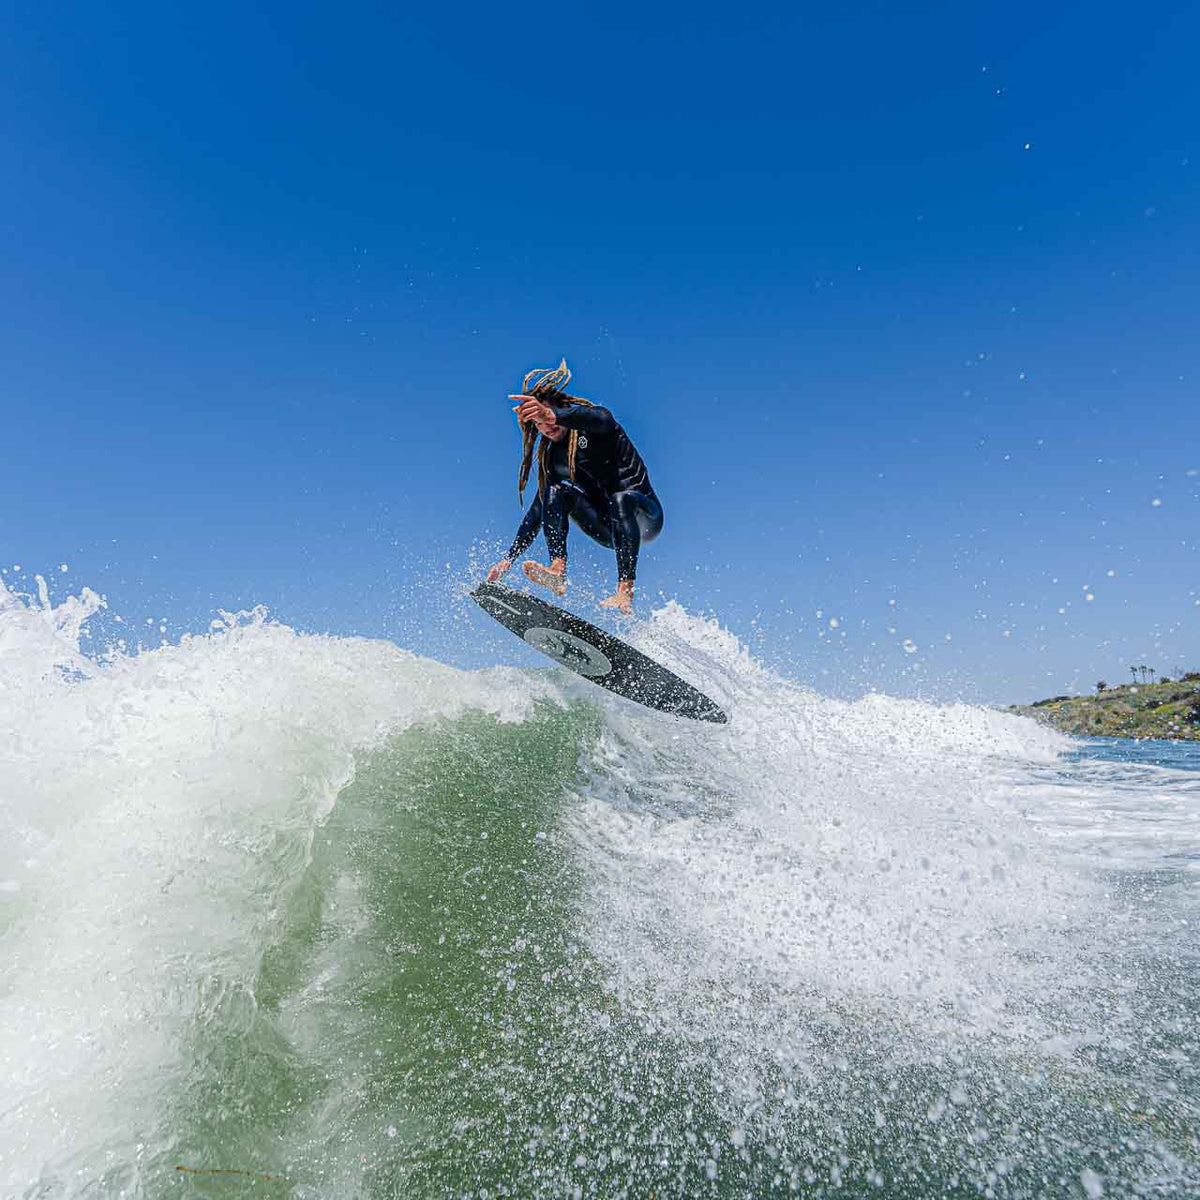 Austin Keen mid air on a Rusty Wakesurf Pro Skimboard with board in the air spinning